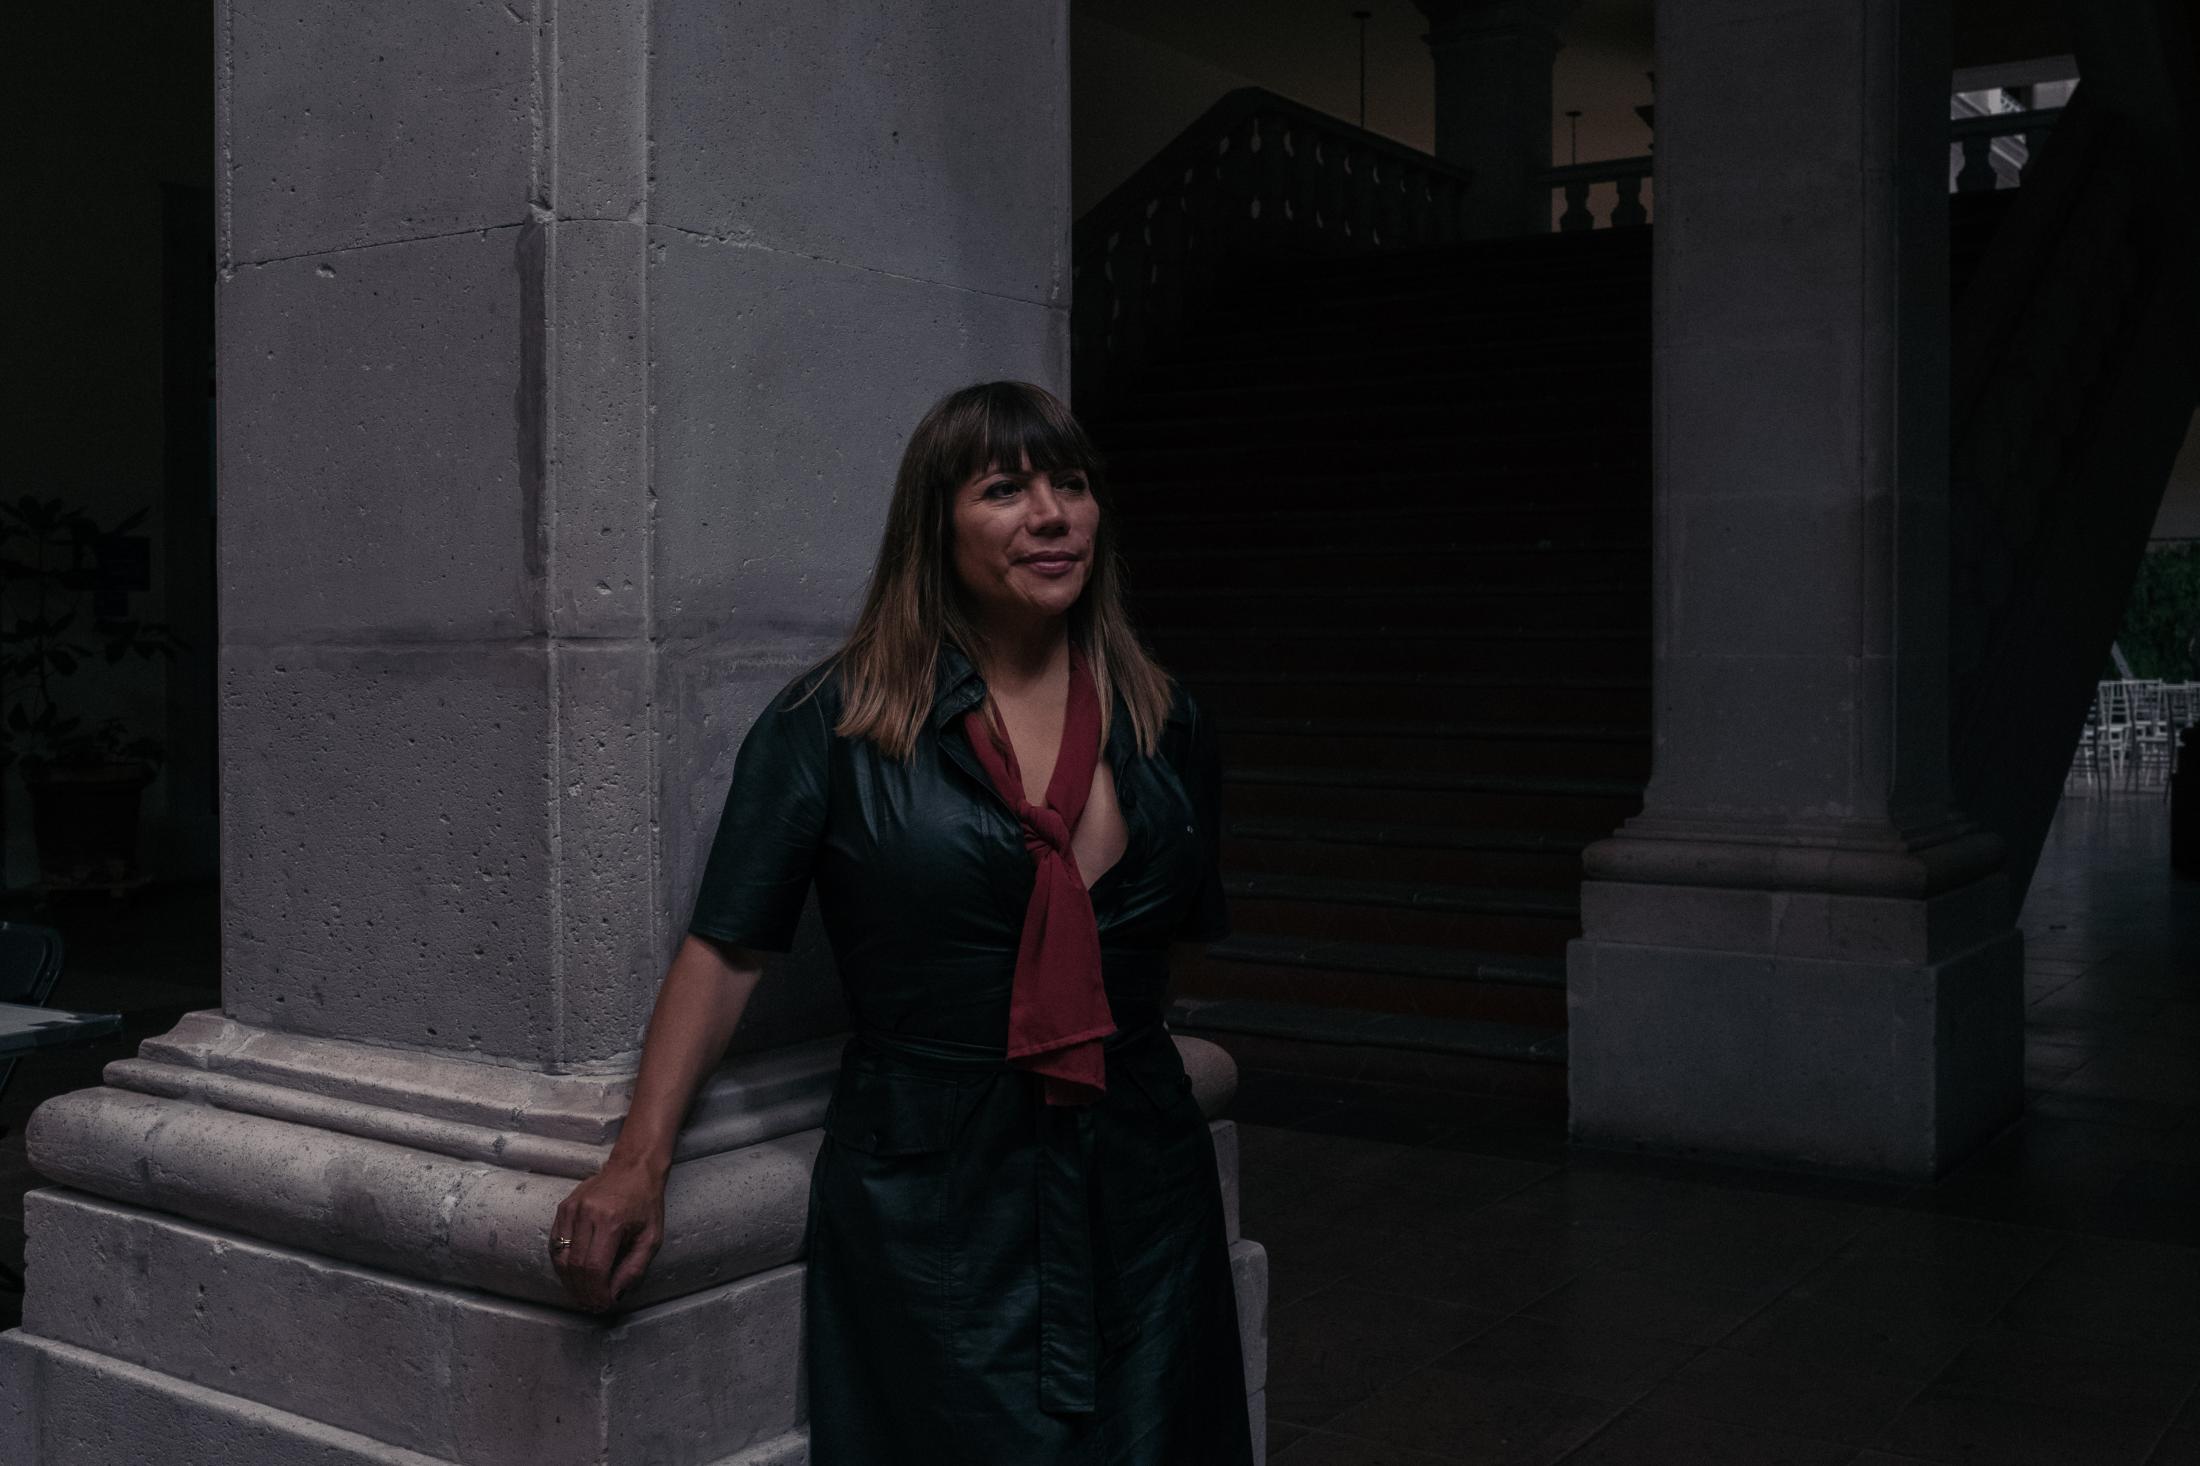  Salma Luevano, Mexican transgender deputy member of the Morena political party.&nbsp; Shot on assignment for KOMITID . Aguascalientes, August 2021. 